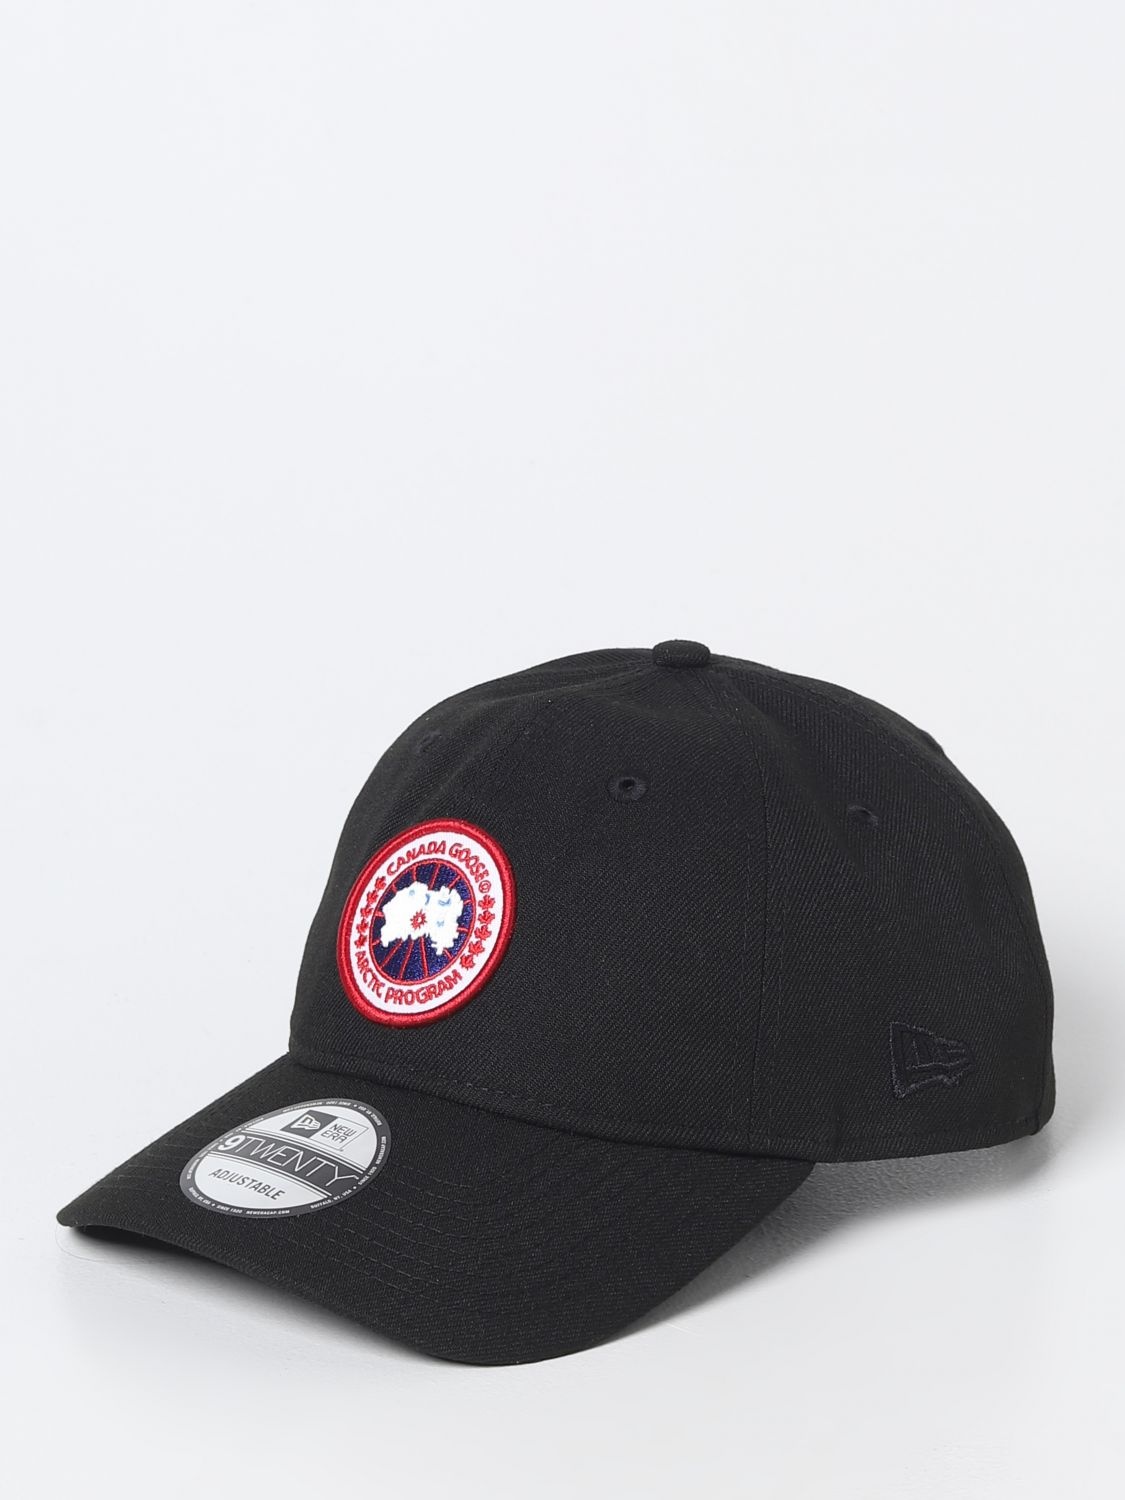 Canada Goose hat for man - 1